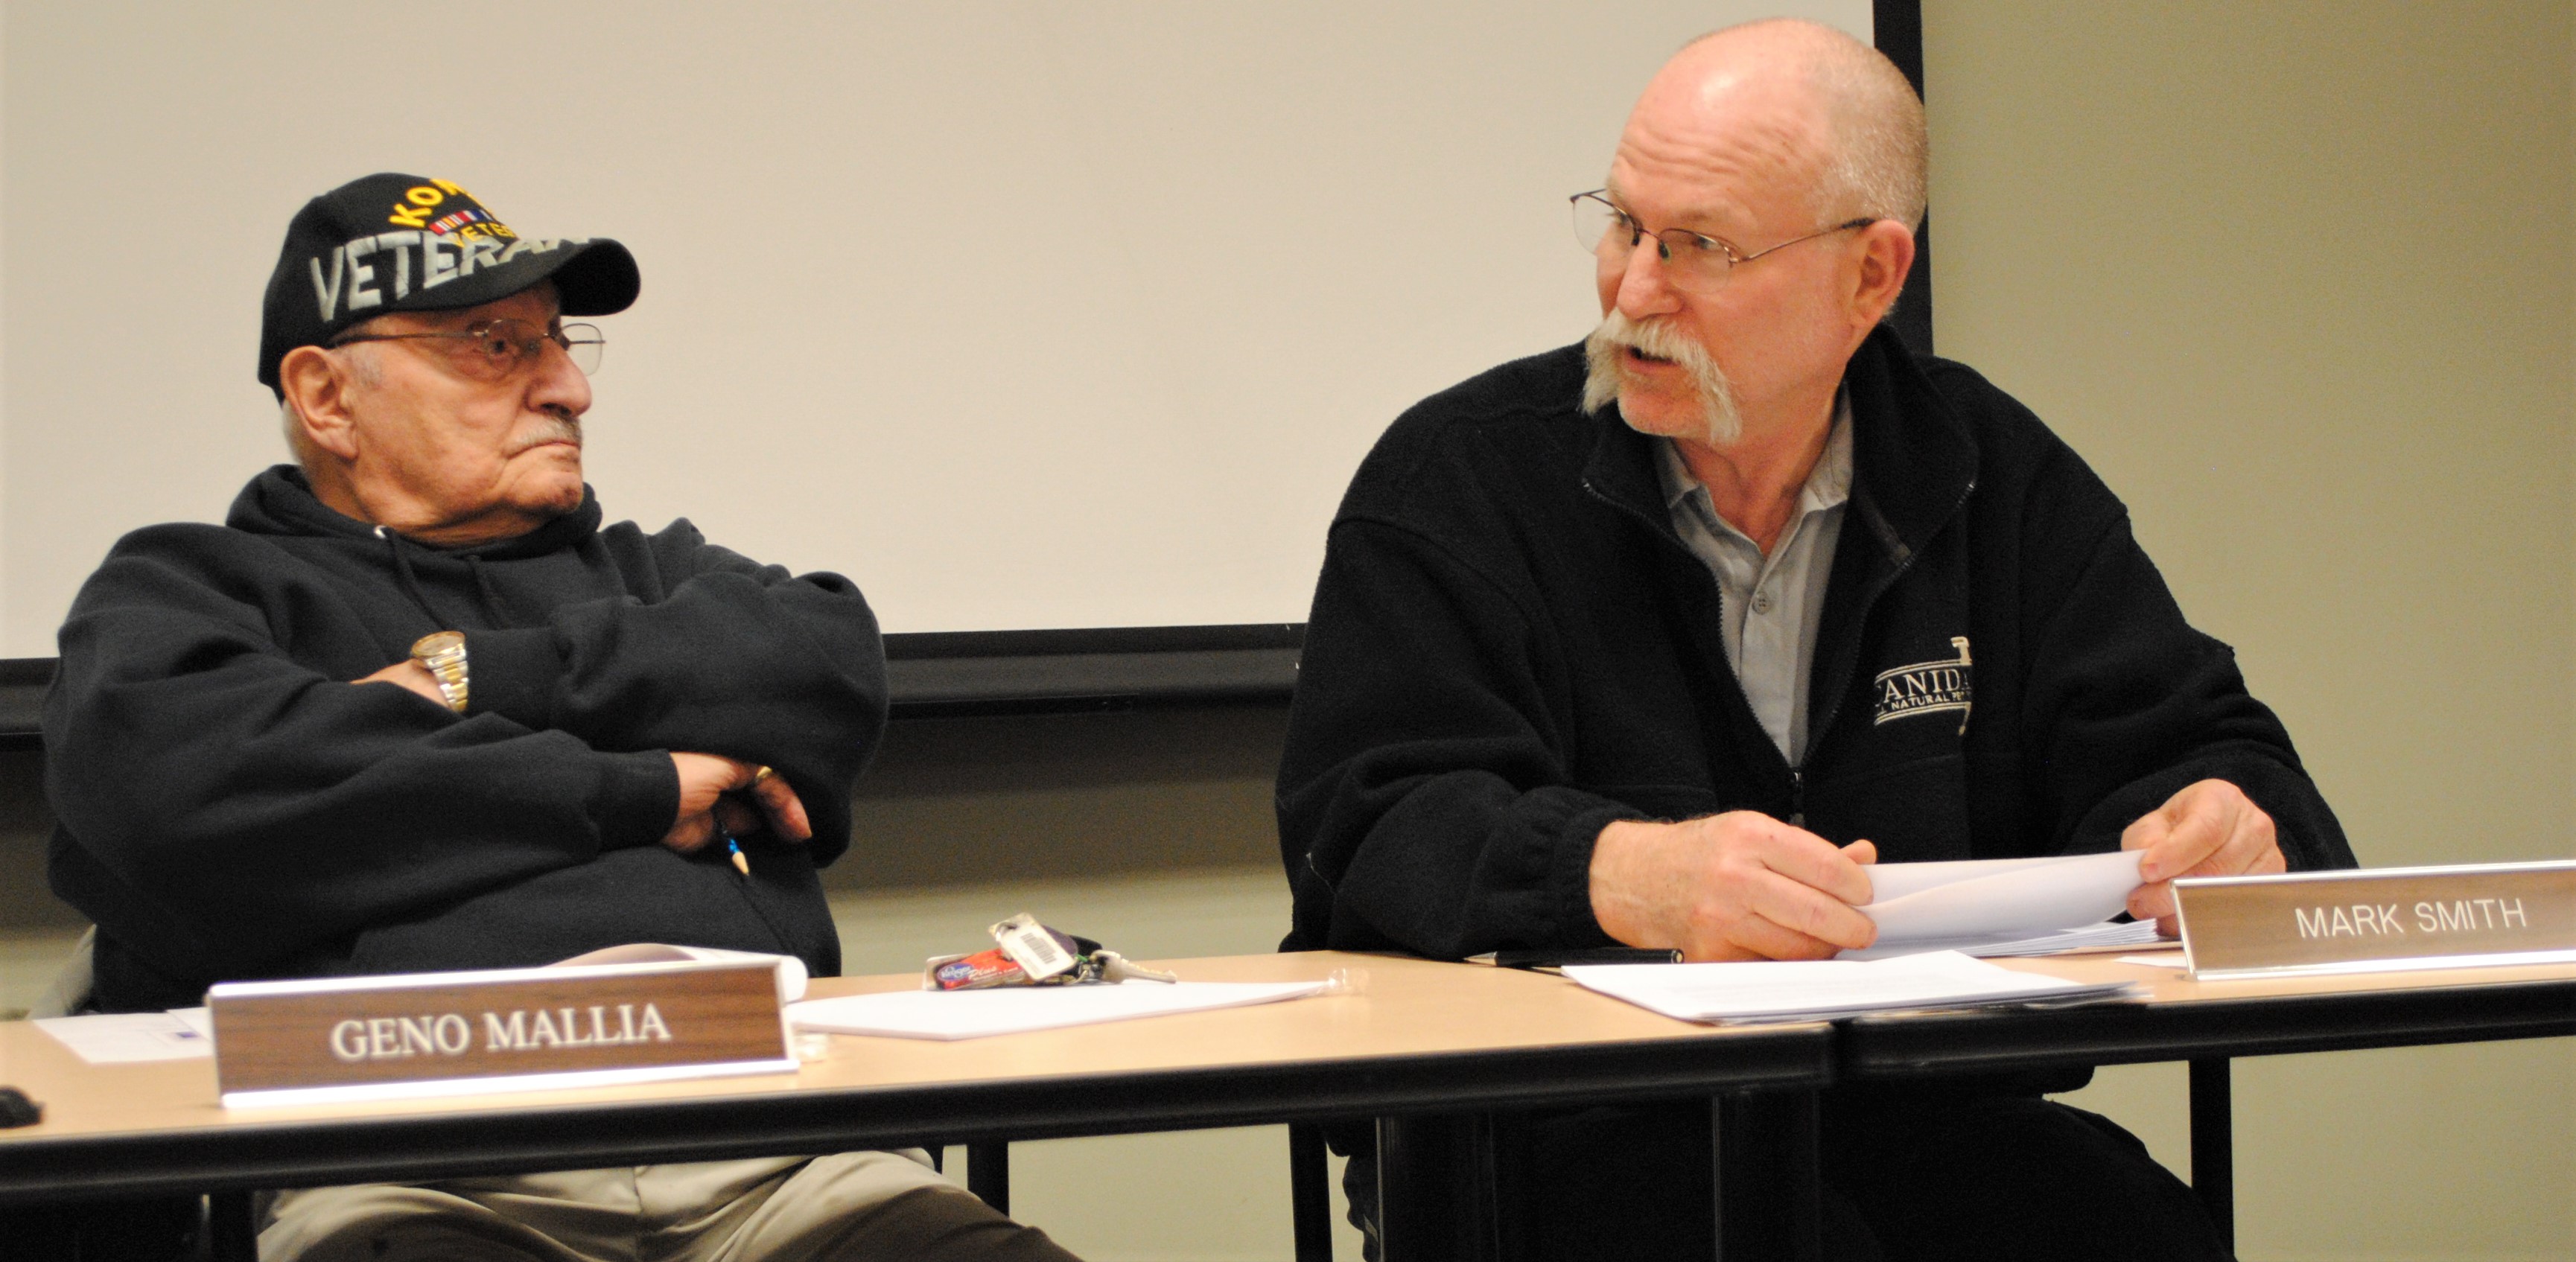 Longtime Fire Board members, Secretary Geno Mallia (left) and Chairman Mark Smith discuss dissolve the fire board. Photo by Shelby Tankersley. 